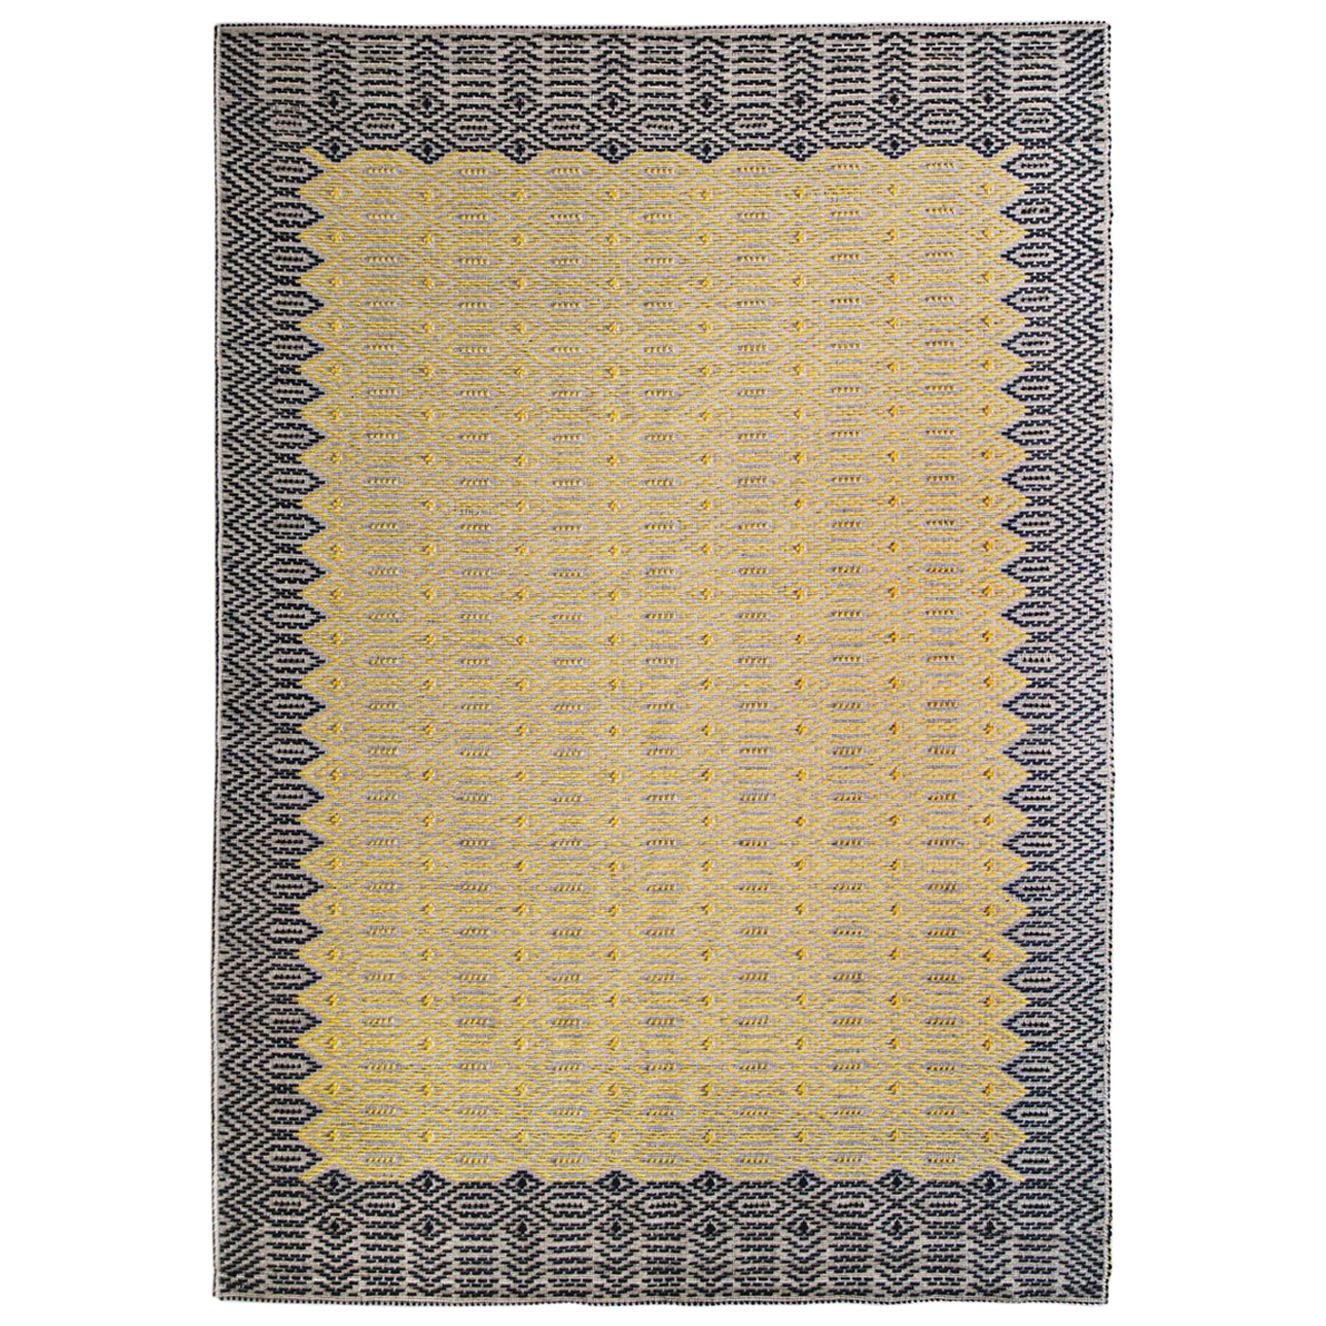 Graphic, Duo-Tone Allover Carpet in Hand-Tufted Sardinian Wool For Sale